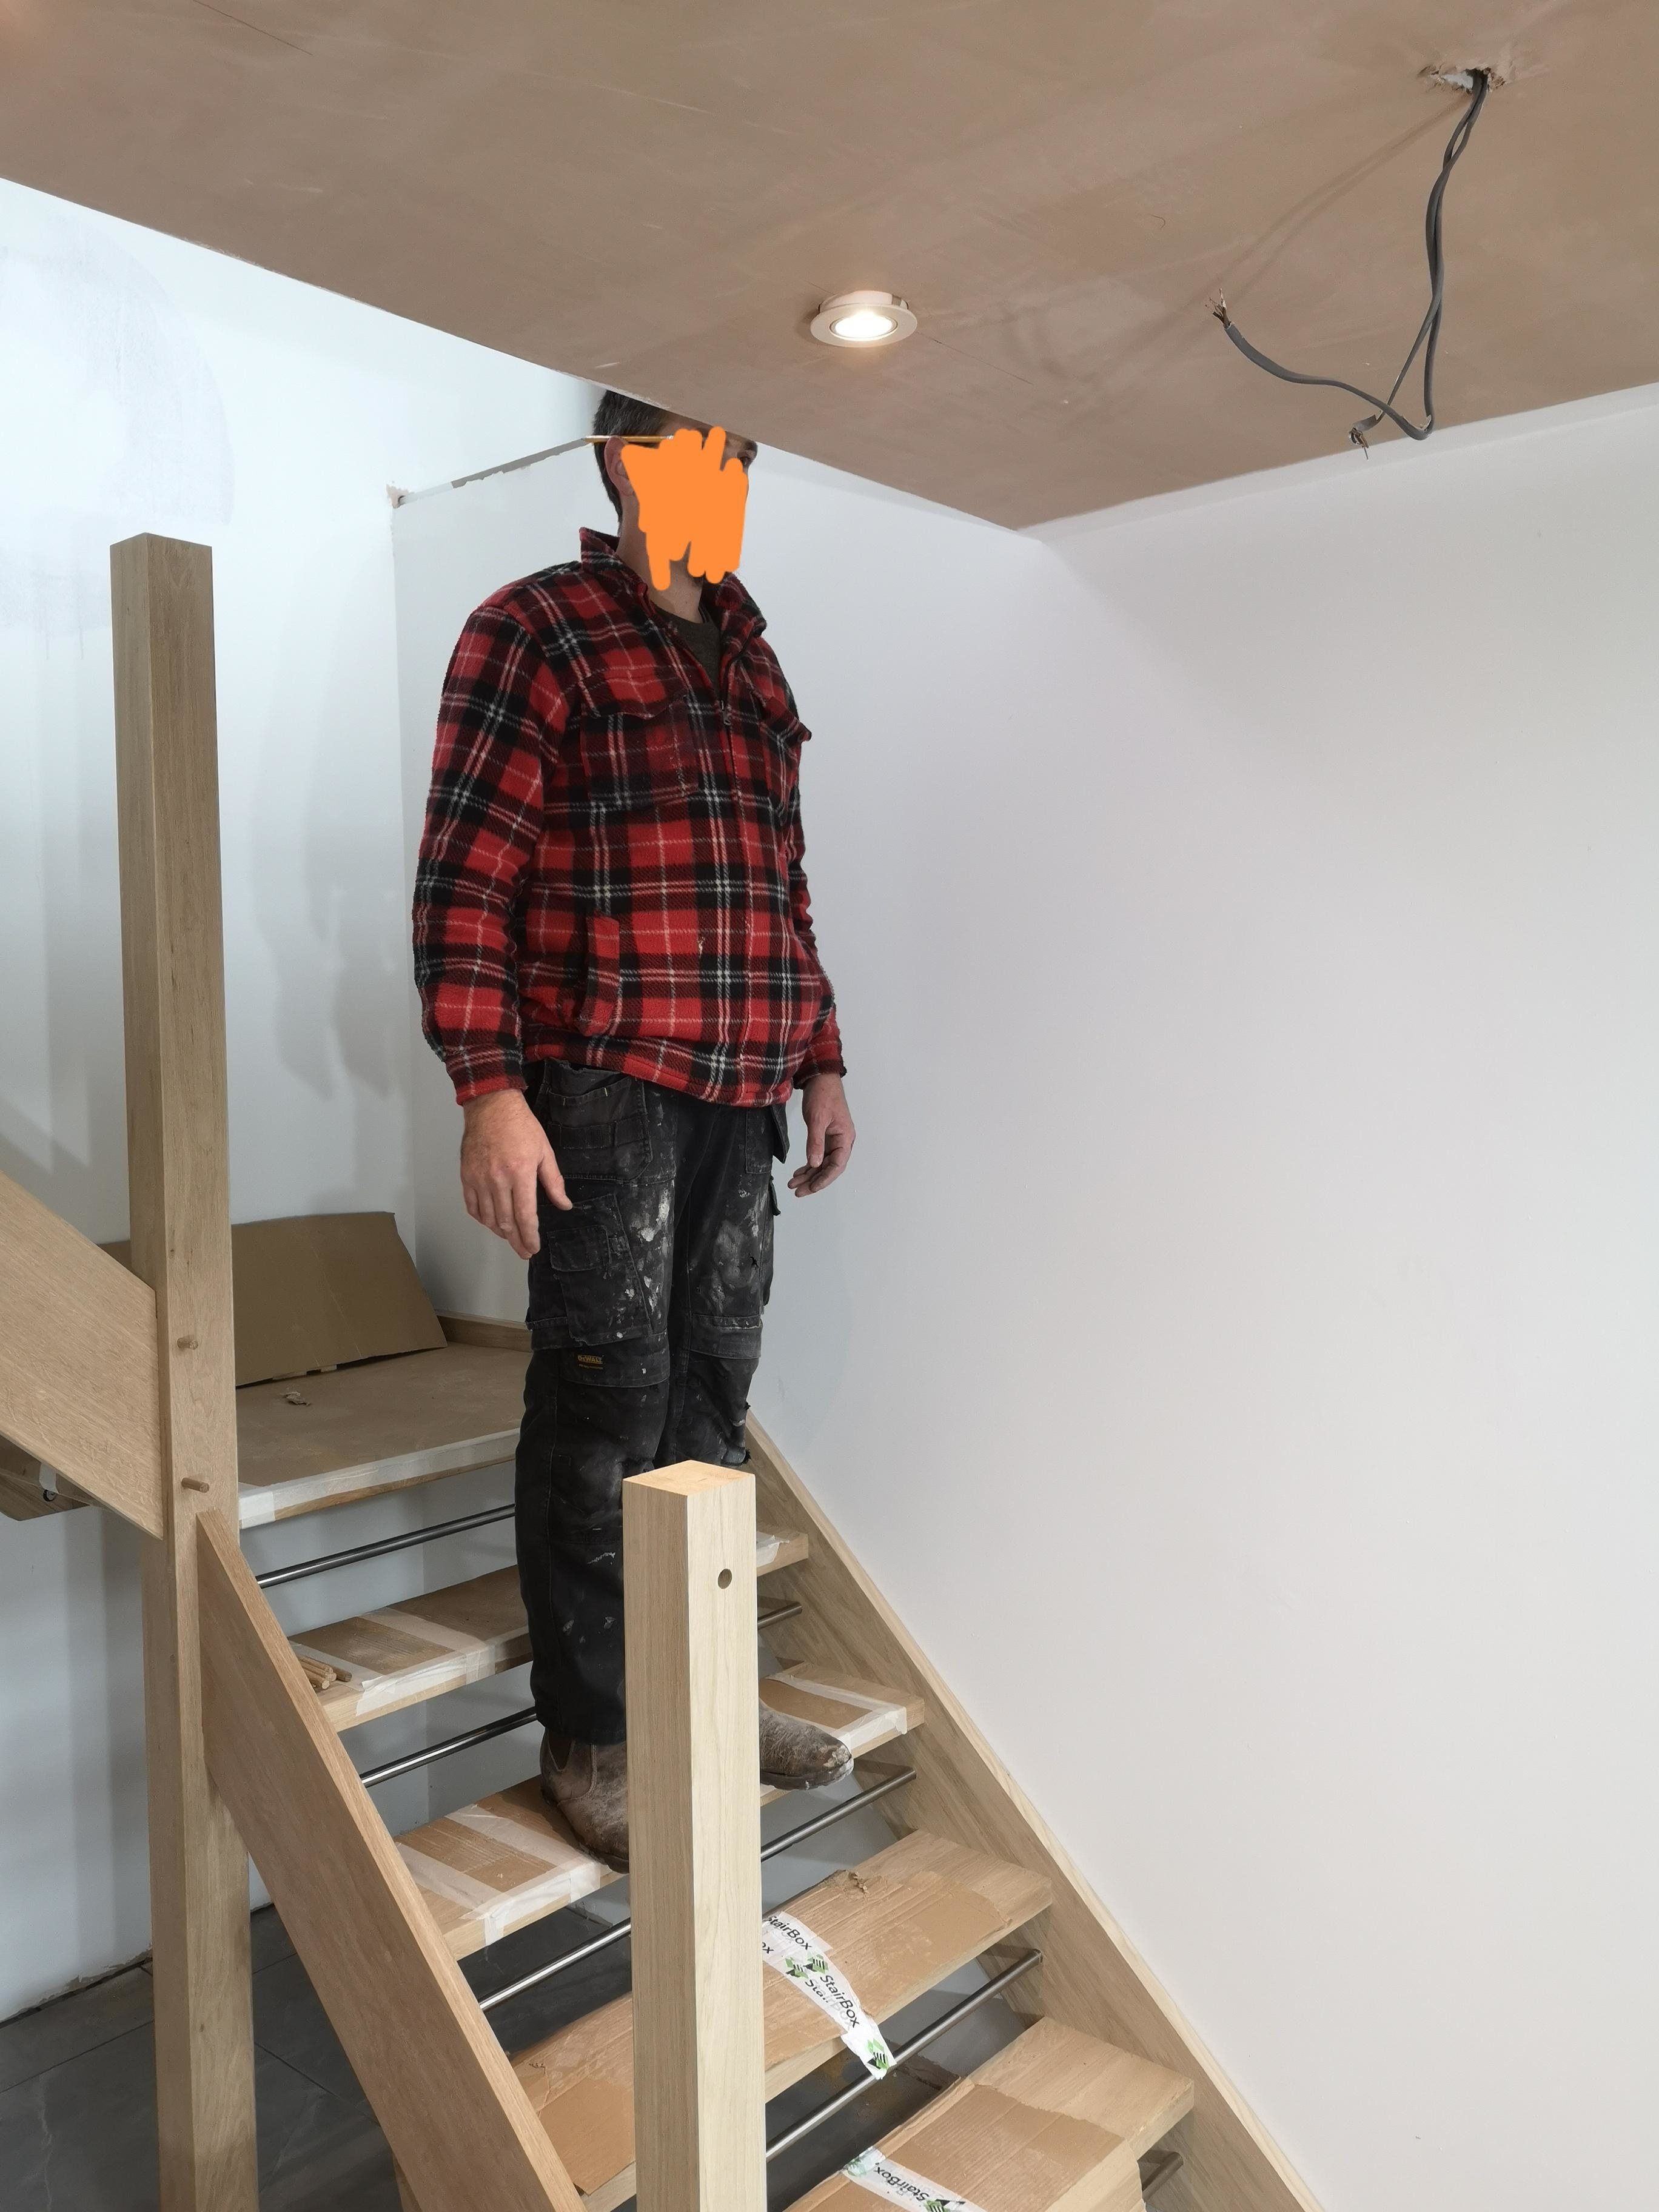 Person standing on a step with their head extending above the ceiling